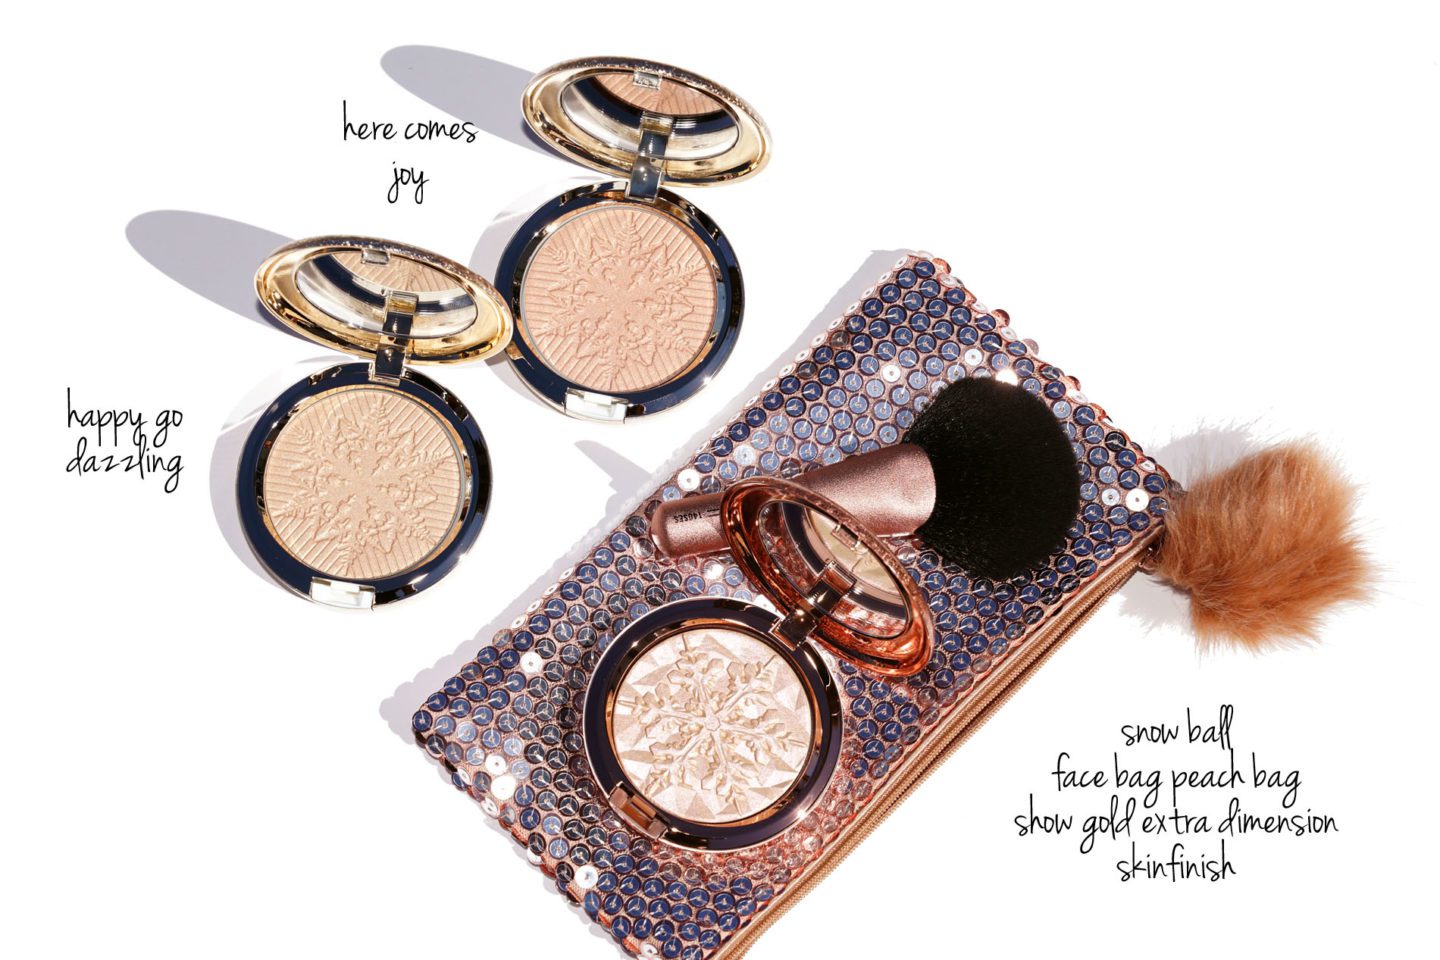 MAC Snow Ball Face Powders Happy Go Dazzling and Here Comes Joy, Snow Ball Face Bag Show Gold